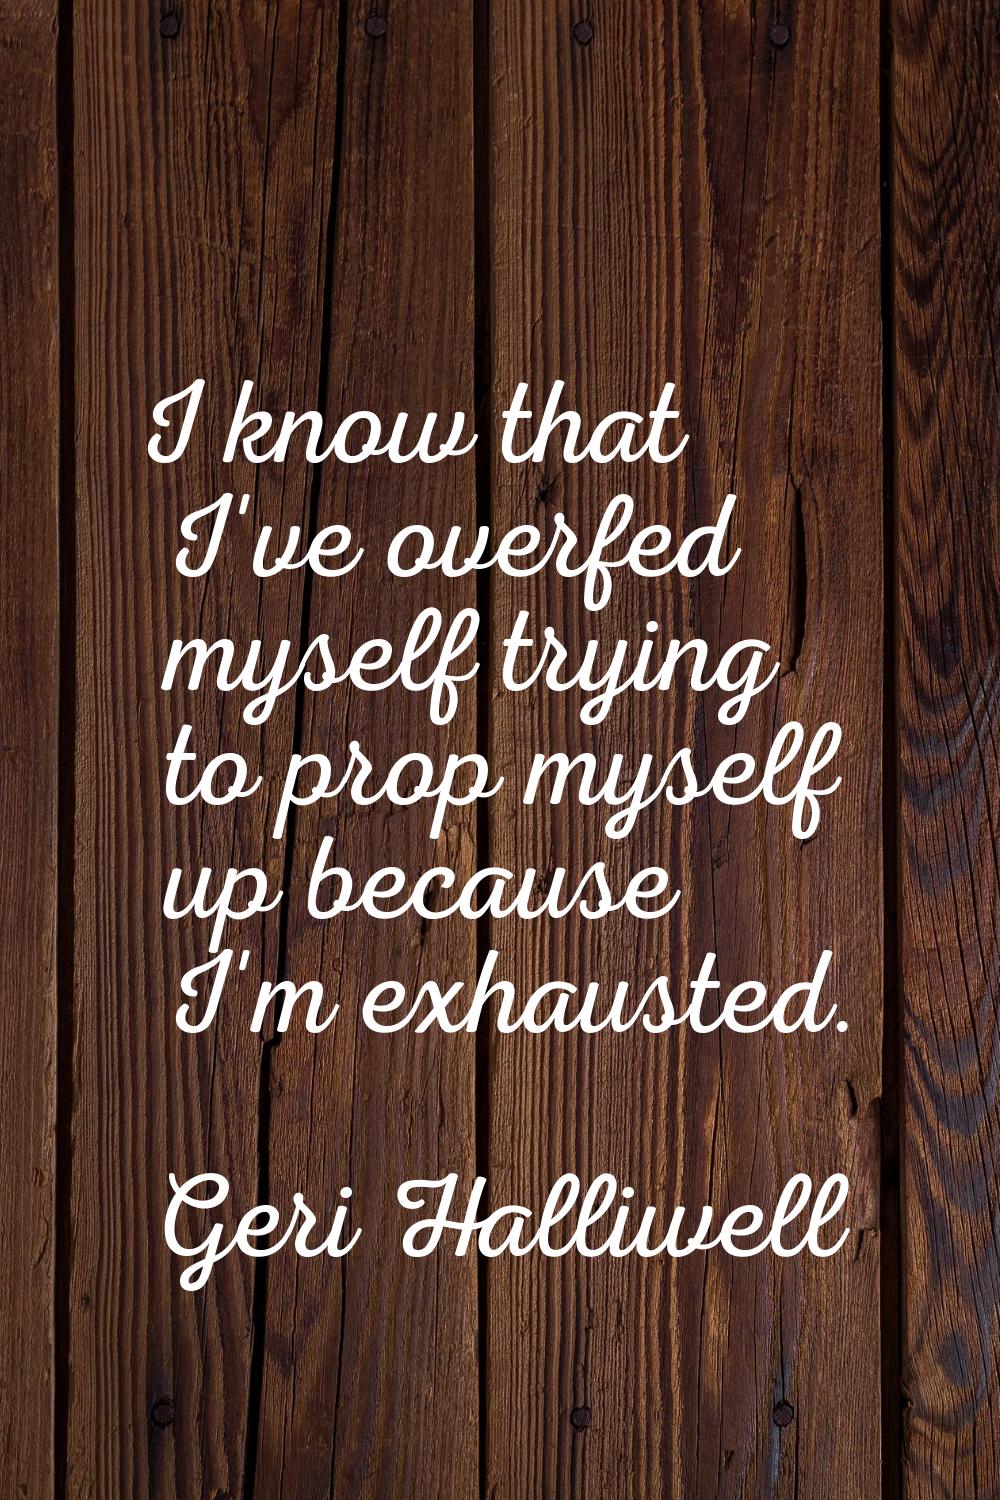 I know that I've overfed myself trying to prop myself up because I'm exhausted.